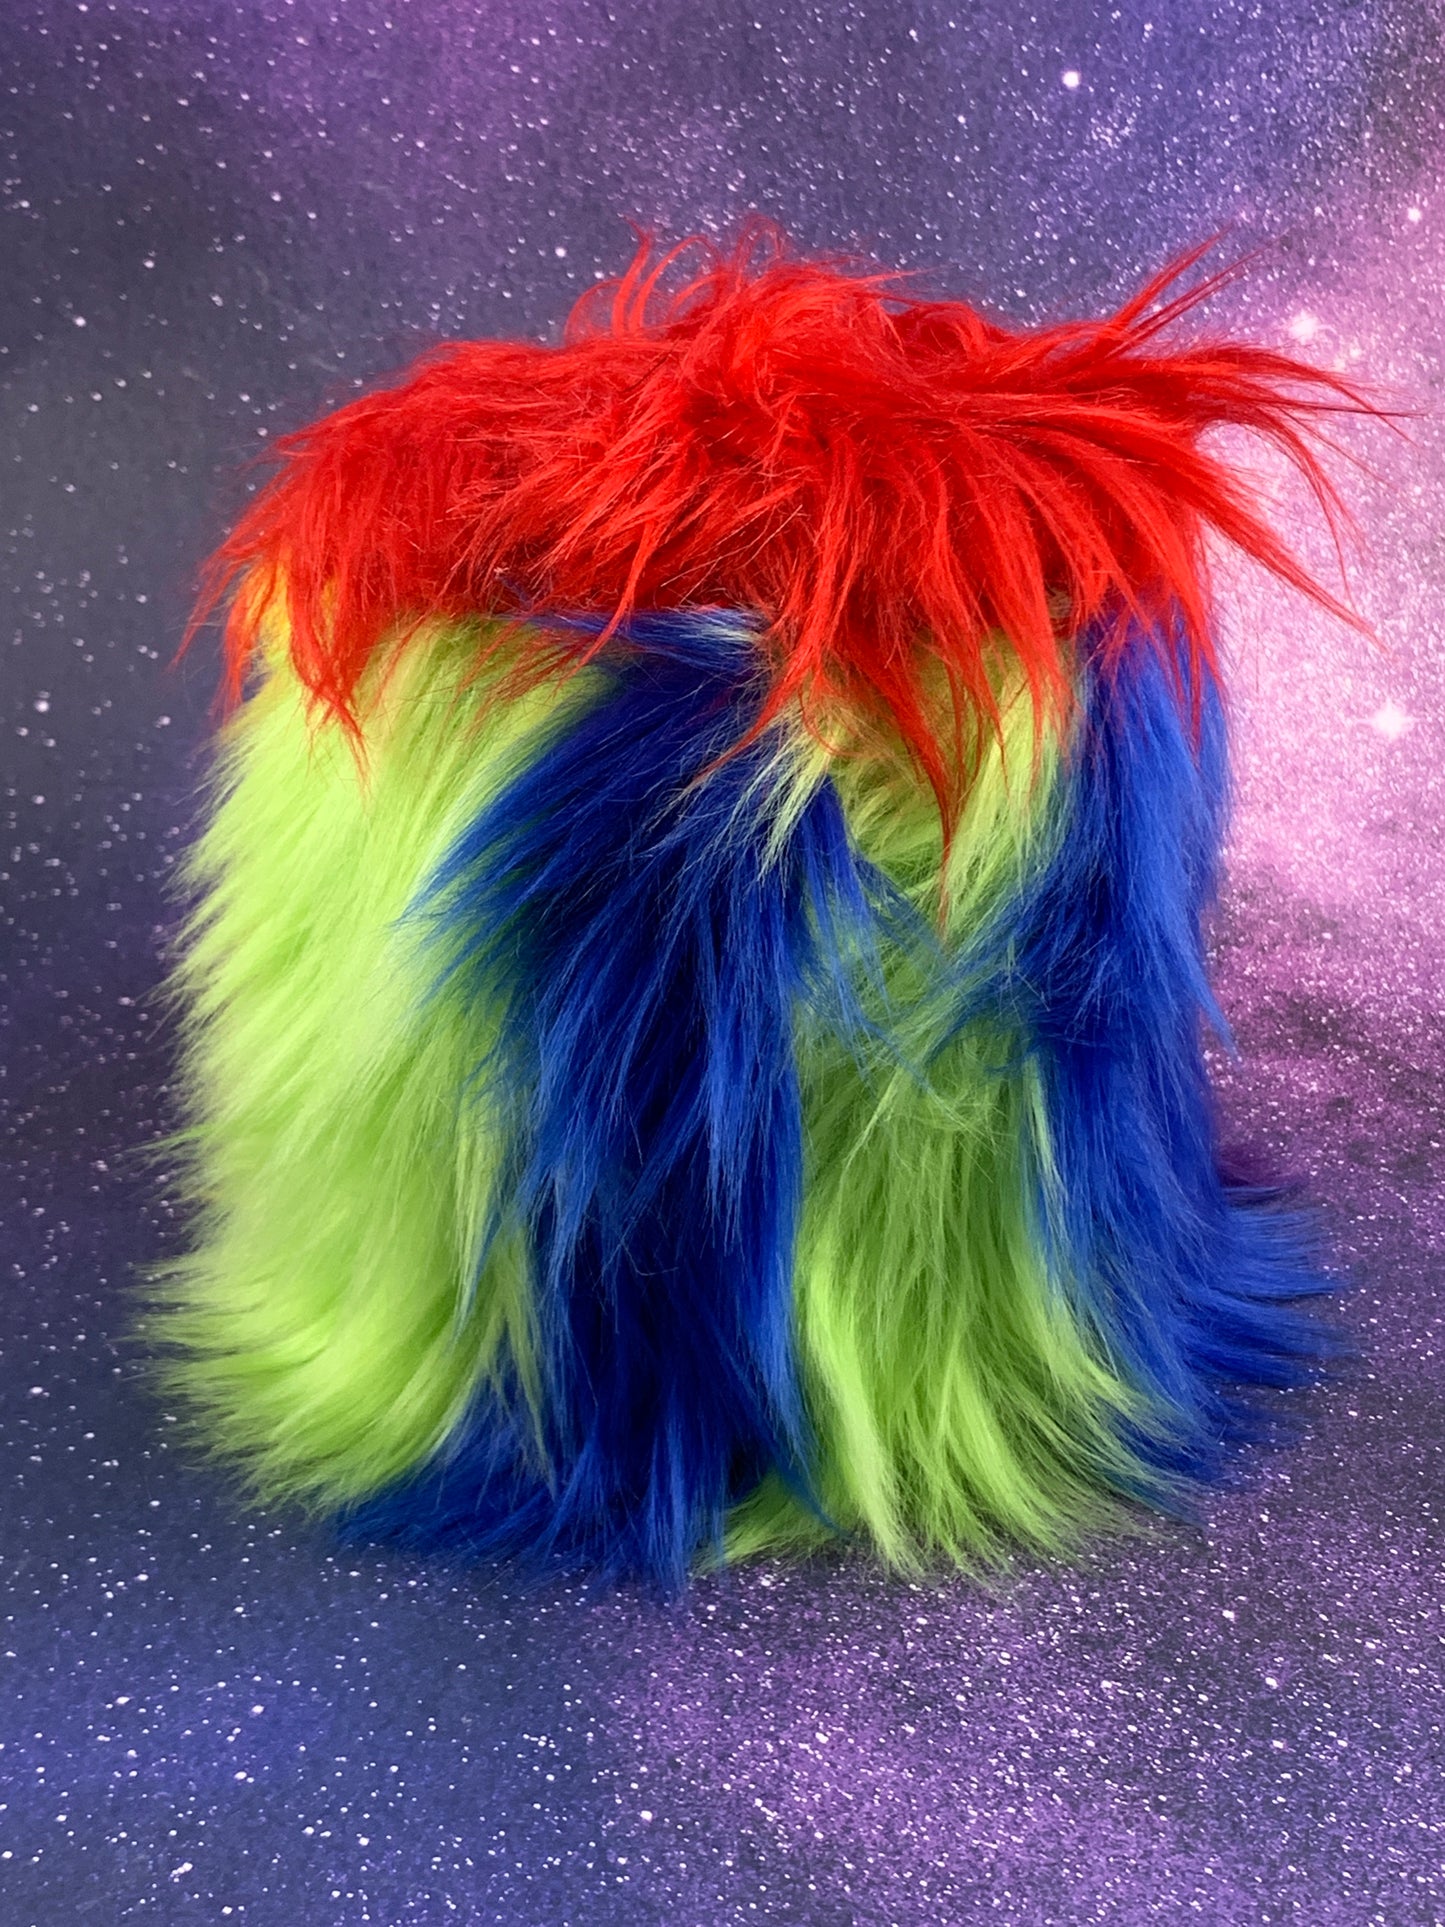 Outer Space Dimrot: Rainbow